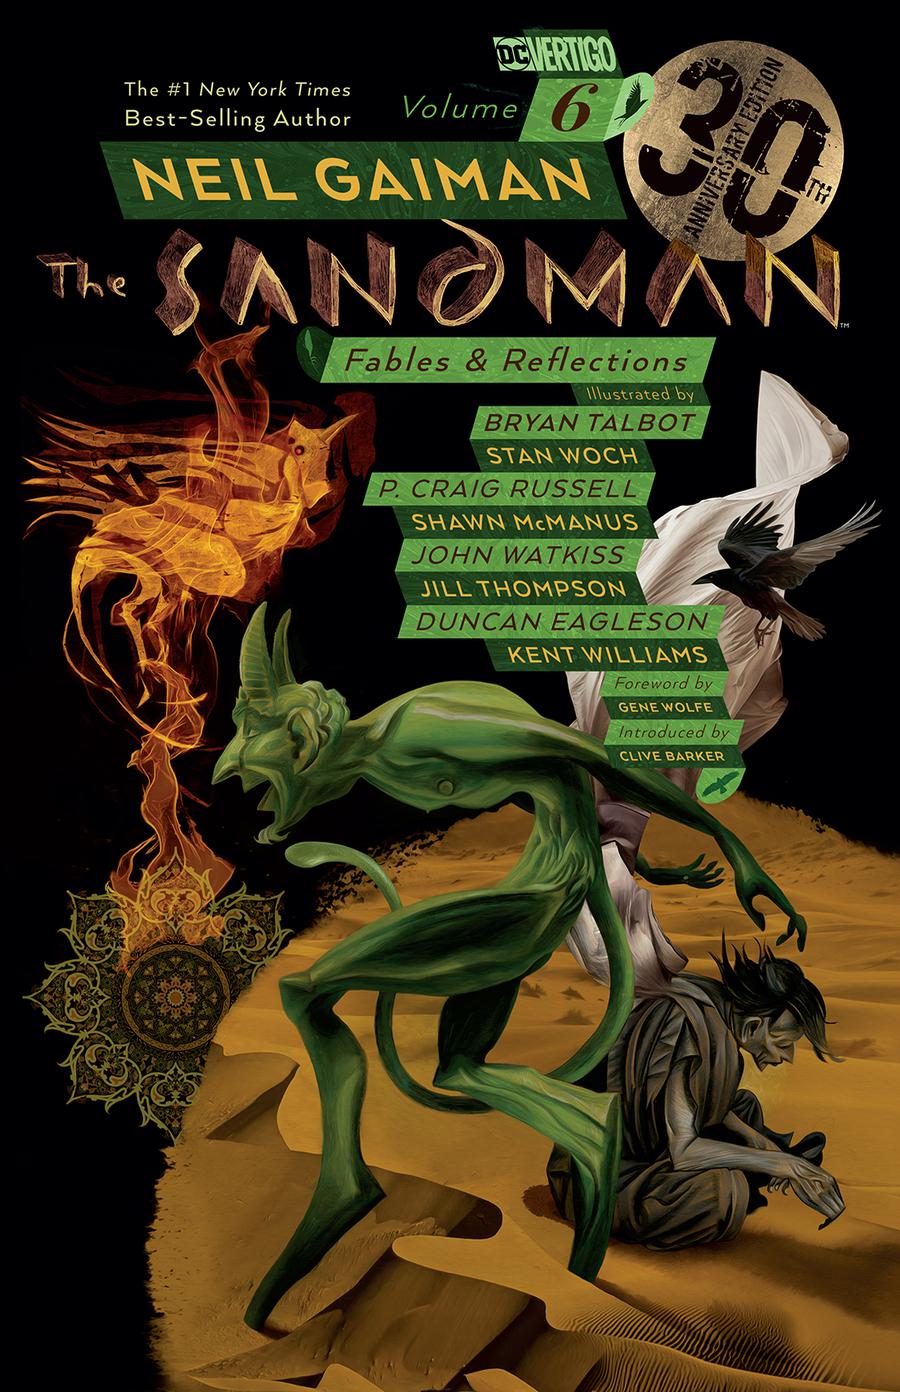 Sandman 30th Anniversary Edition Vol 6 Fables & Reflections TP